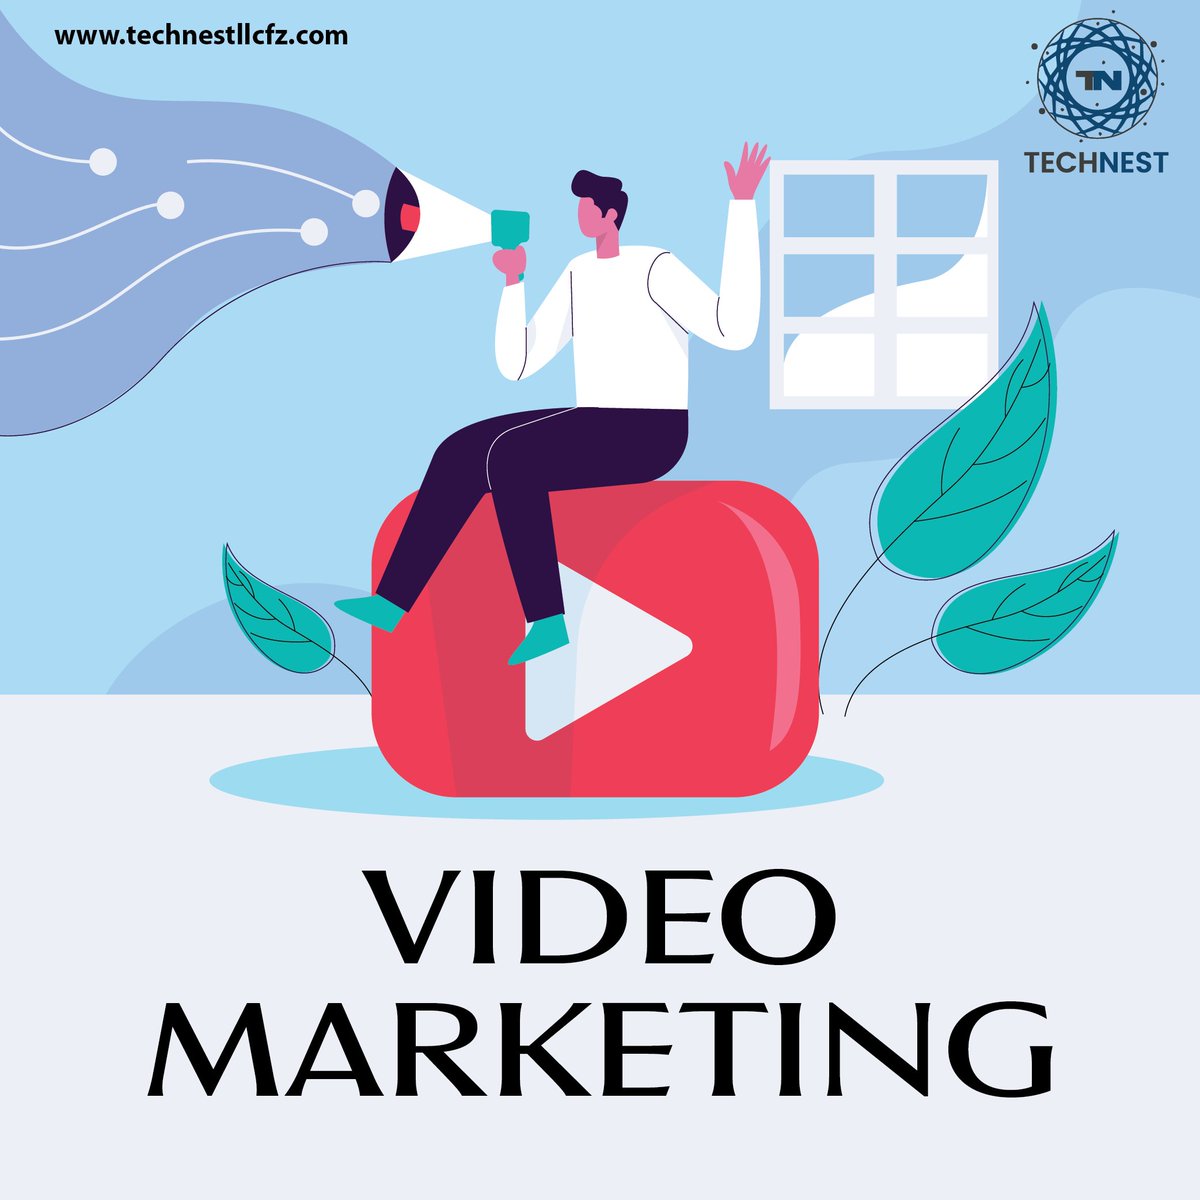 Captivate your audience with powerful video marketing. Our creative team crafts compelling videos that engage, inspire, and drive action. Let's tell your brand story through the power of video! 🌟
.
.
#videomarketing #technestllcfz #EngagementMatters